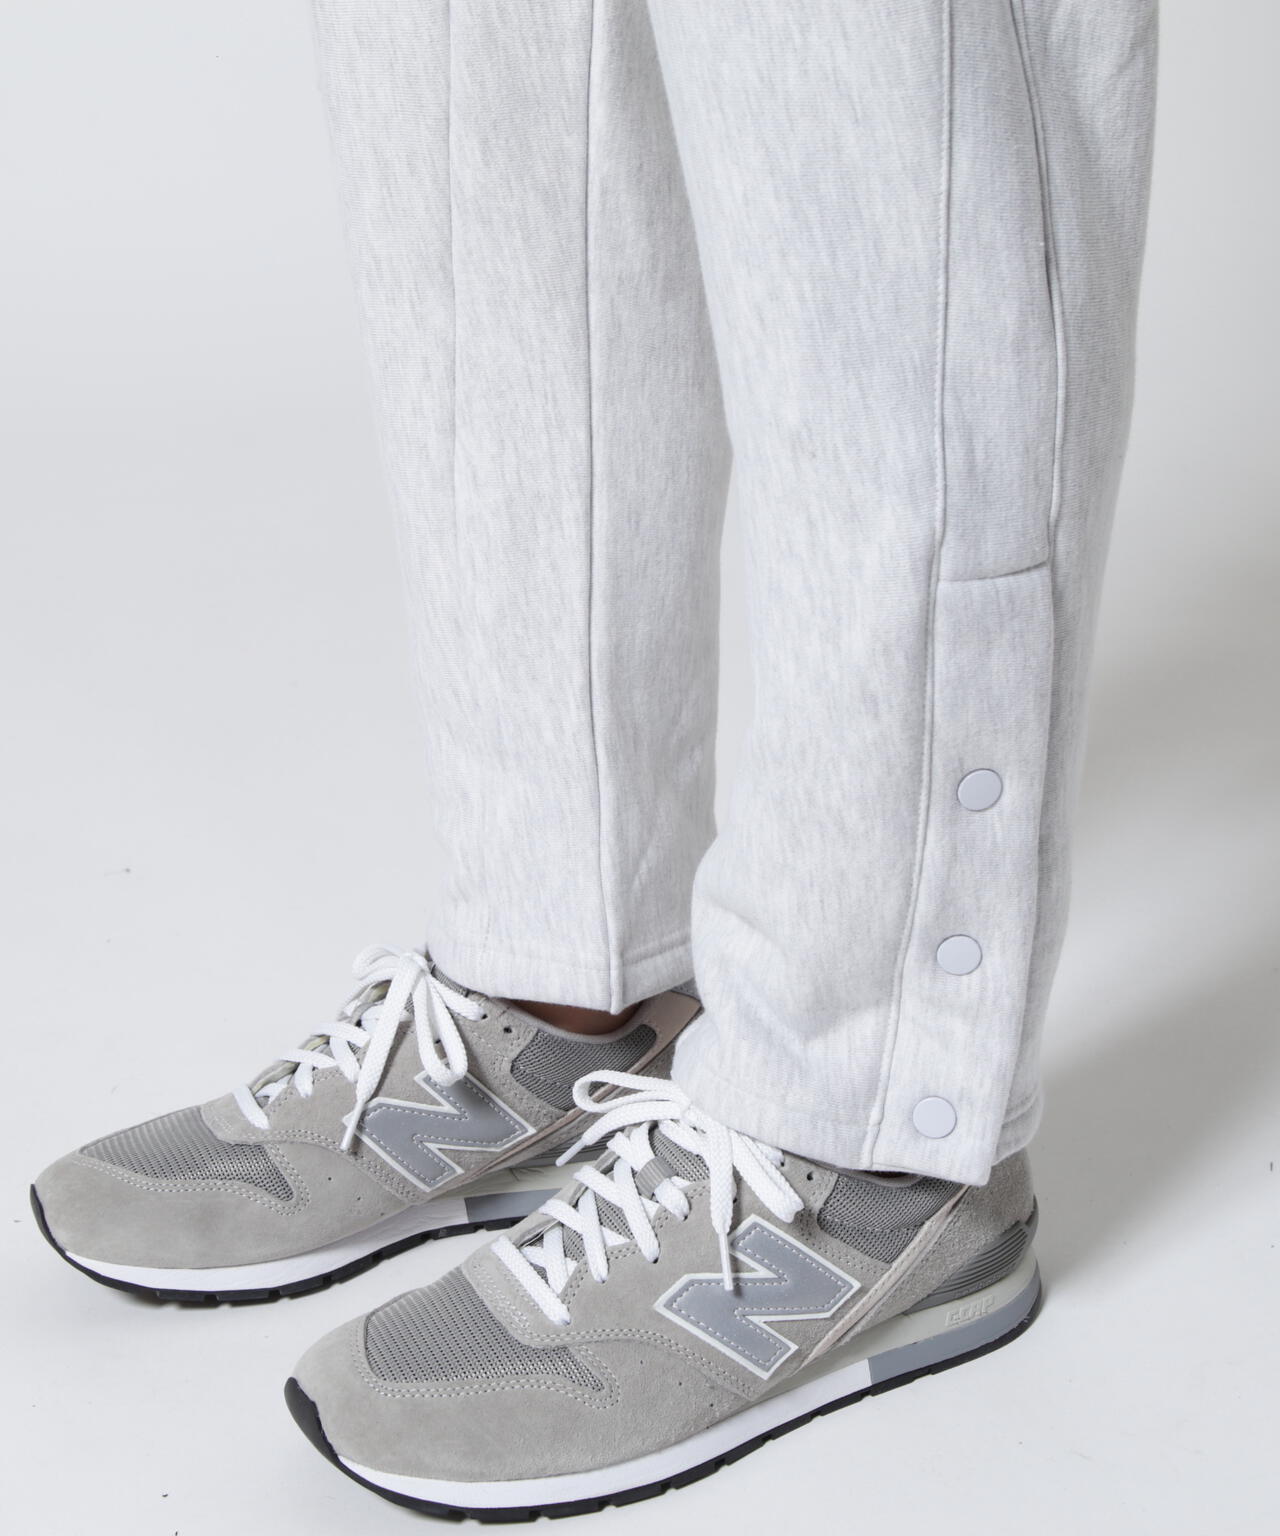 EXAMPLE/エグザンプル/BLESSING WORLDS SIDE BUTTON SWEAT PANTS